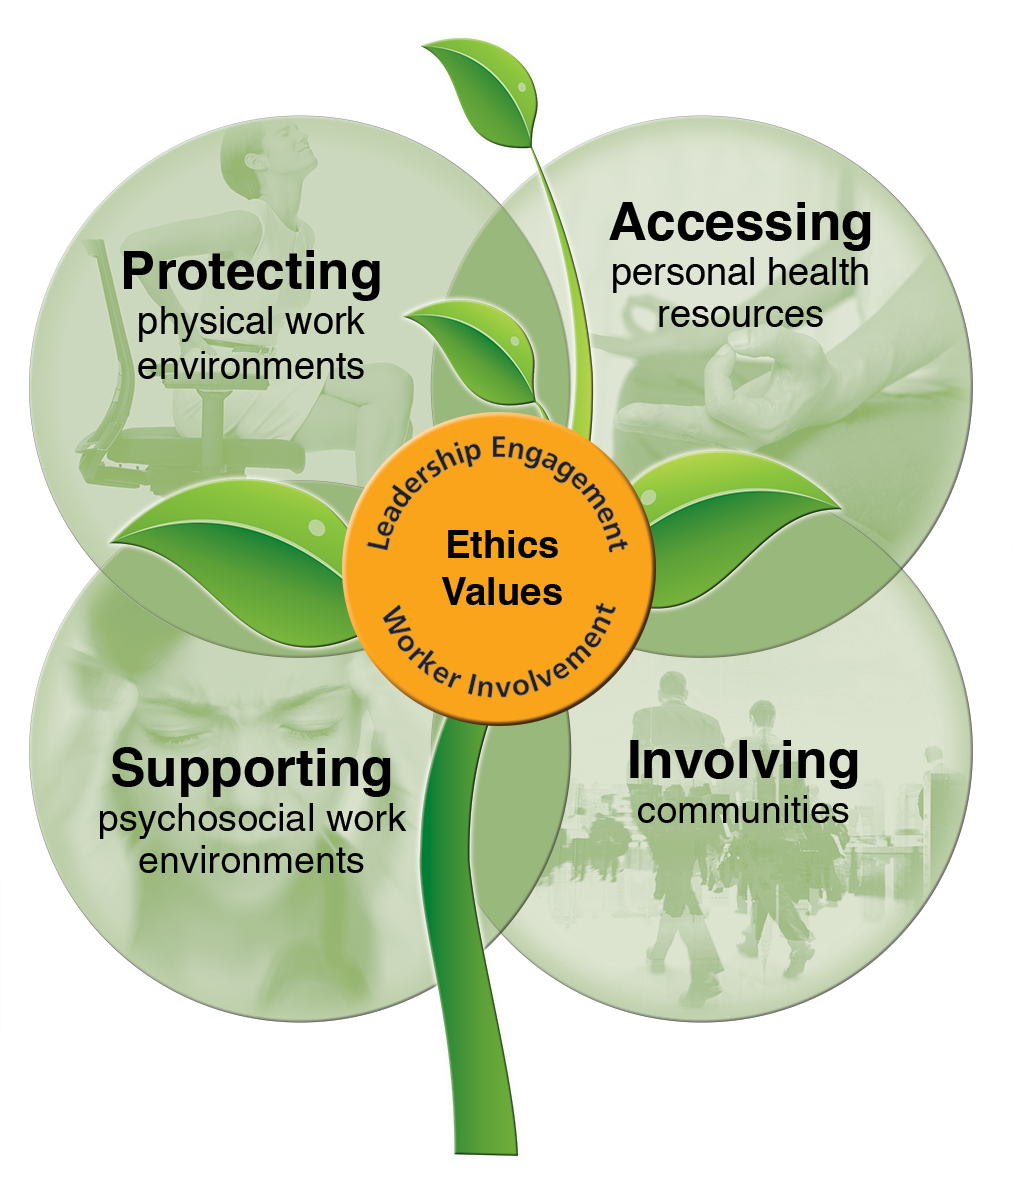 Ethics Values. Leadership Engagement. Worker Involvement. Protecting physical work environments. Accessing personal health resources. Supporting psychosocial work environments. Involving communities.